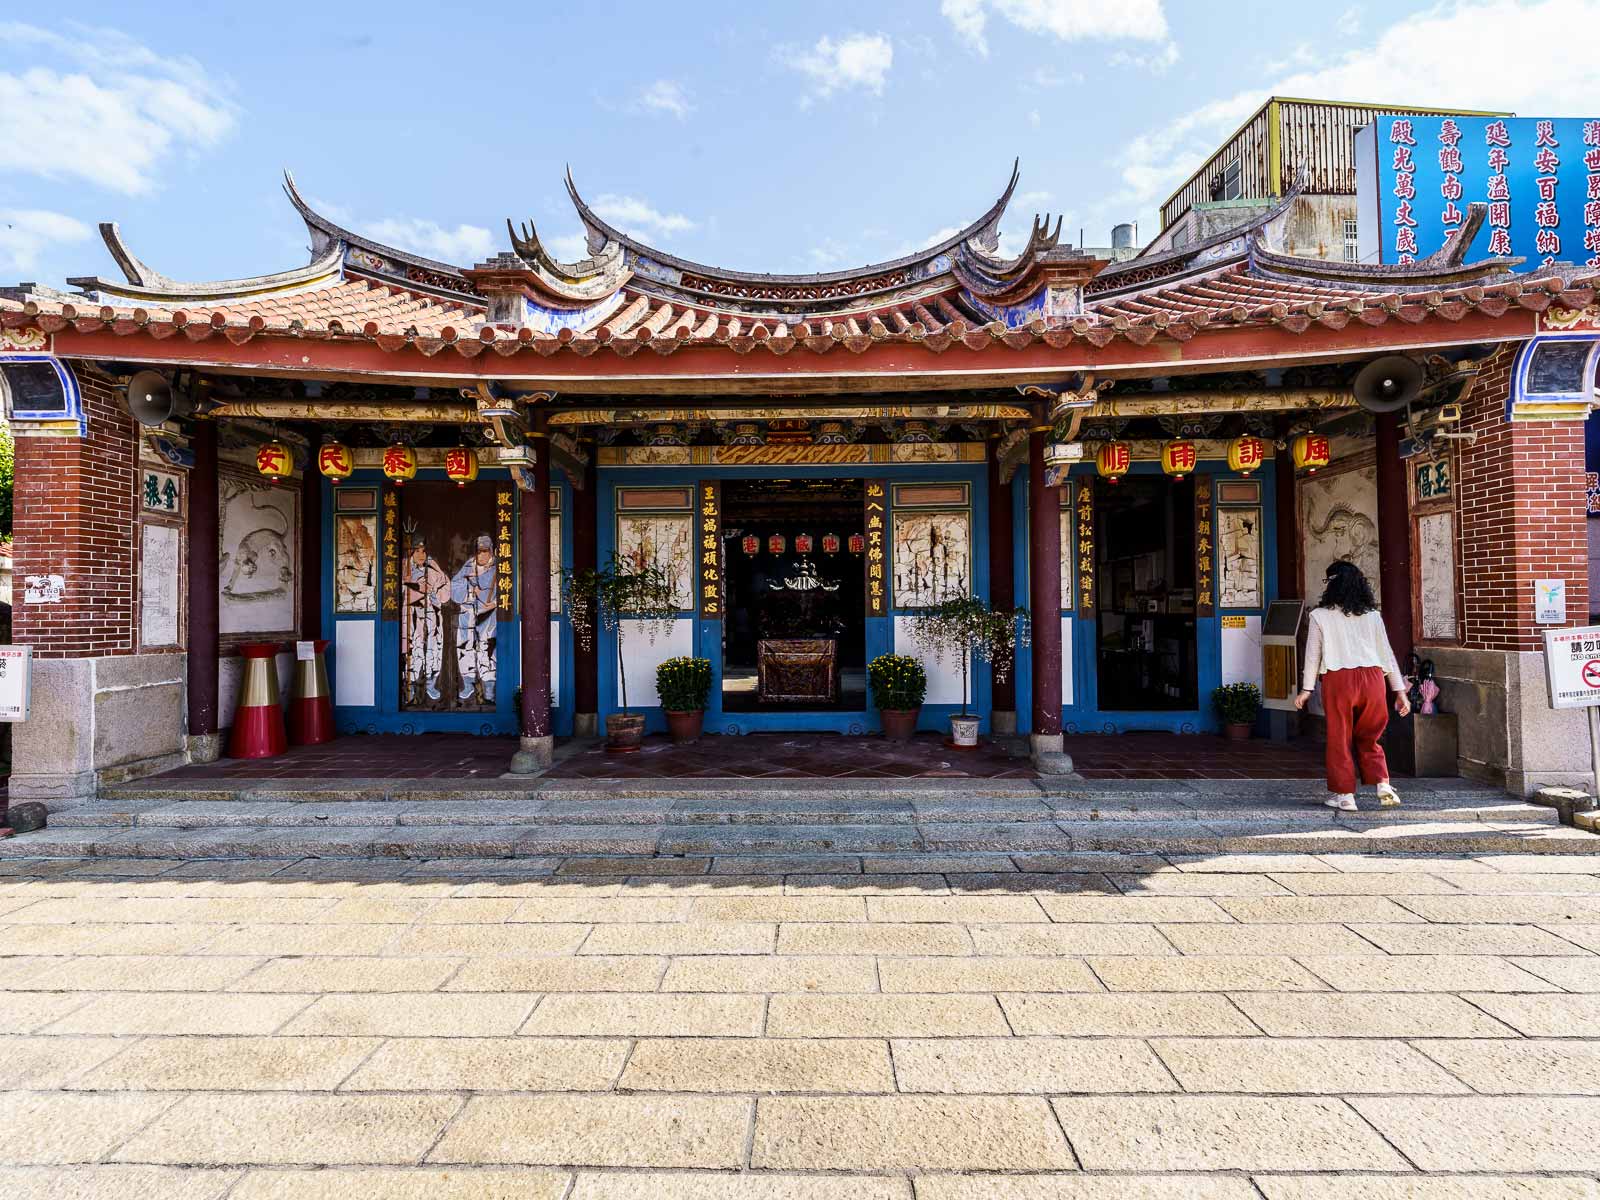 The colorful front facade of the single-story Decang Temple.